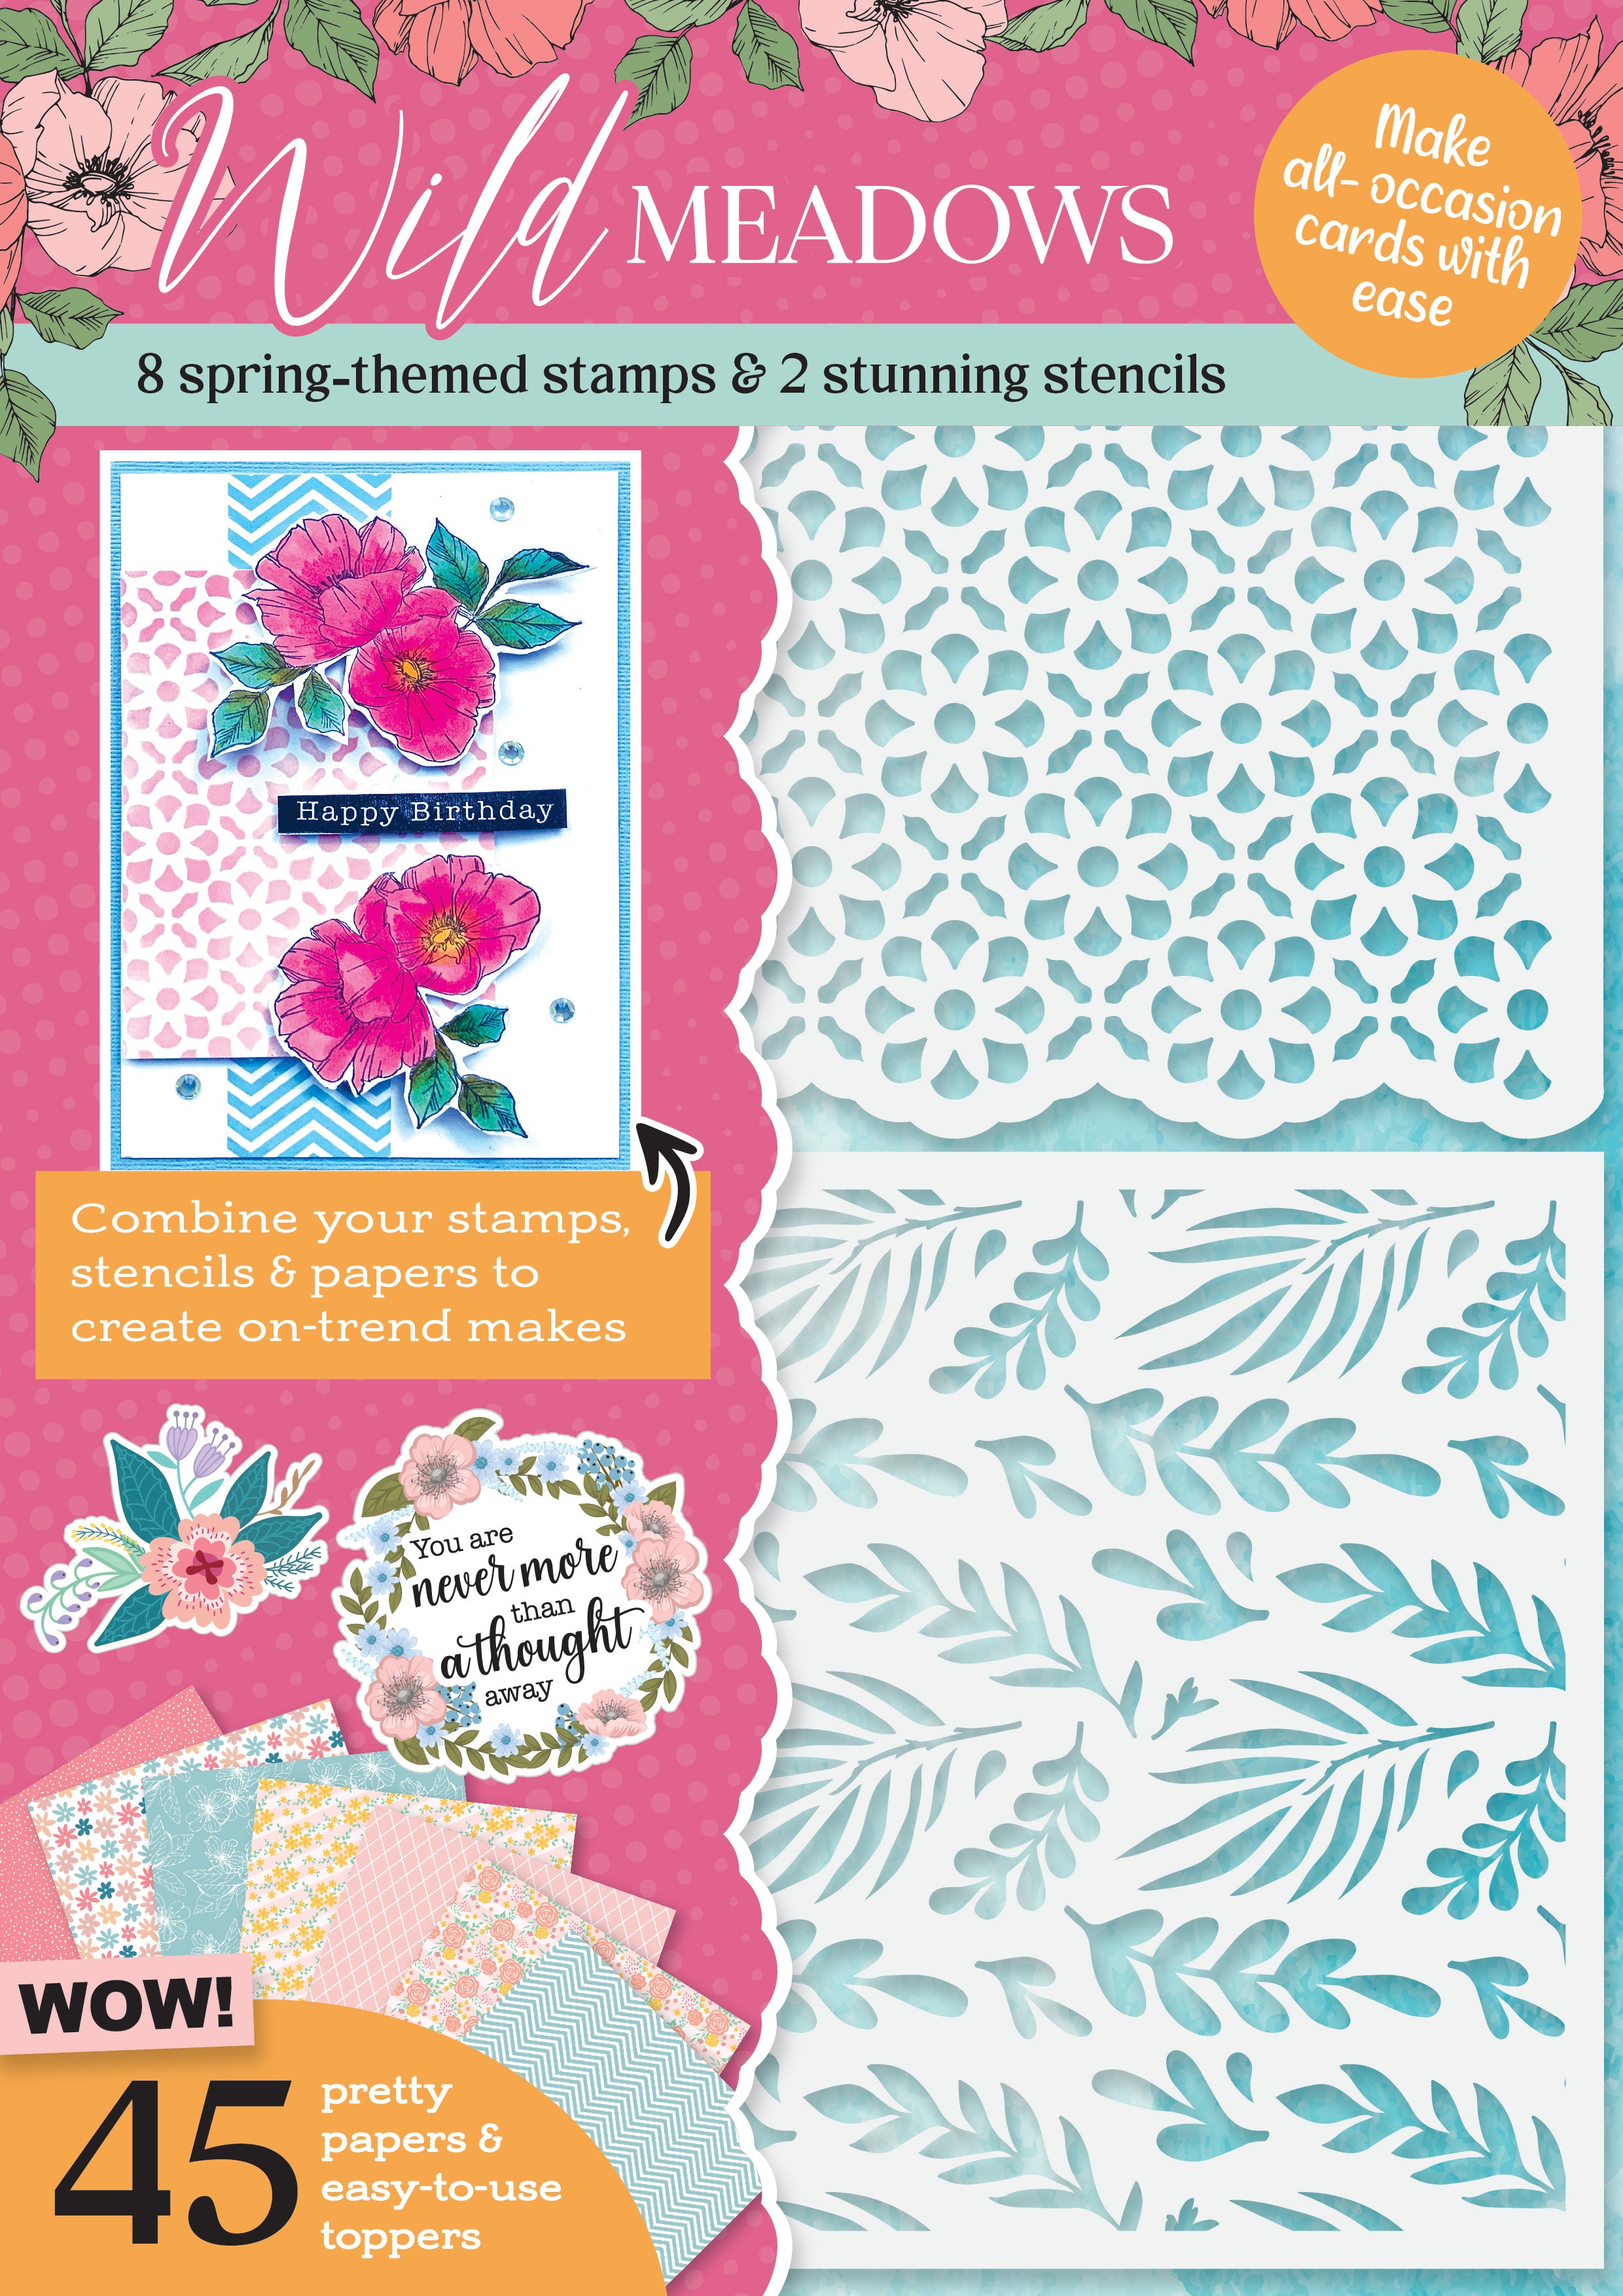 Simply Cards & Papercraft - Issue 256